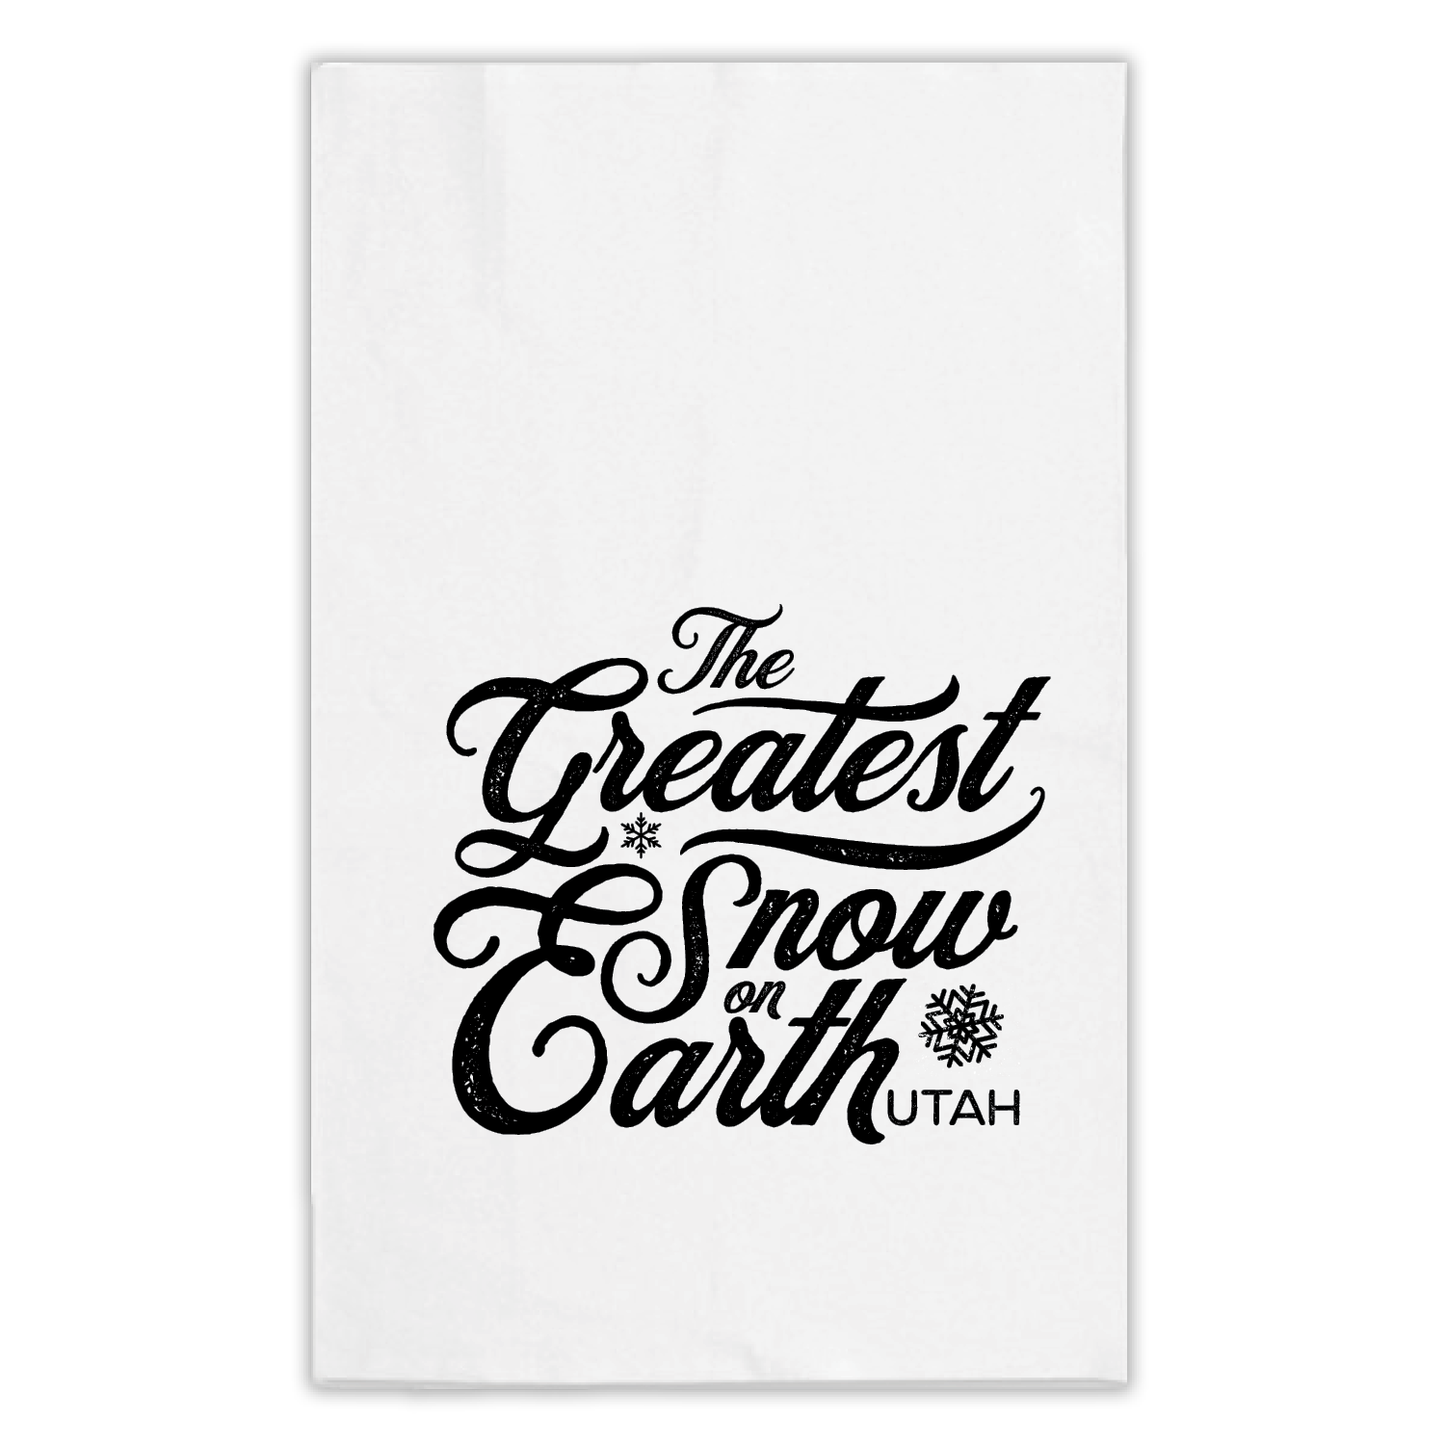 The Greatest Snow on Earth tea towel with snowflakes